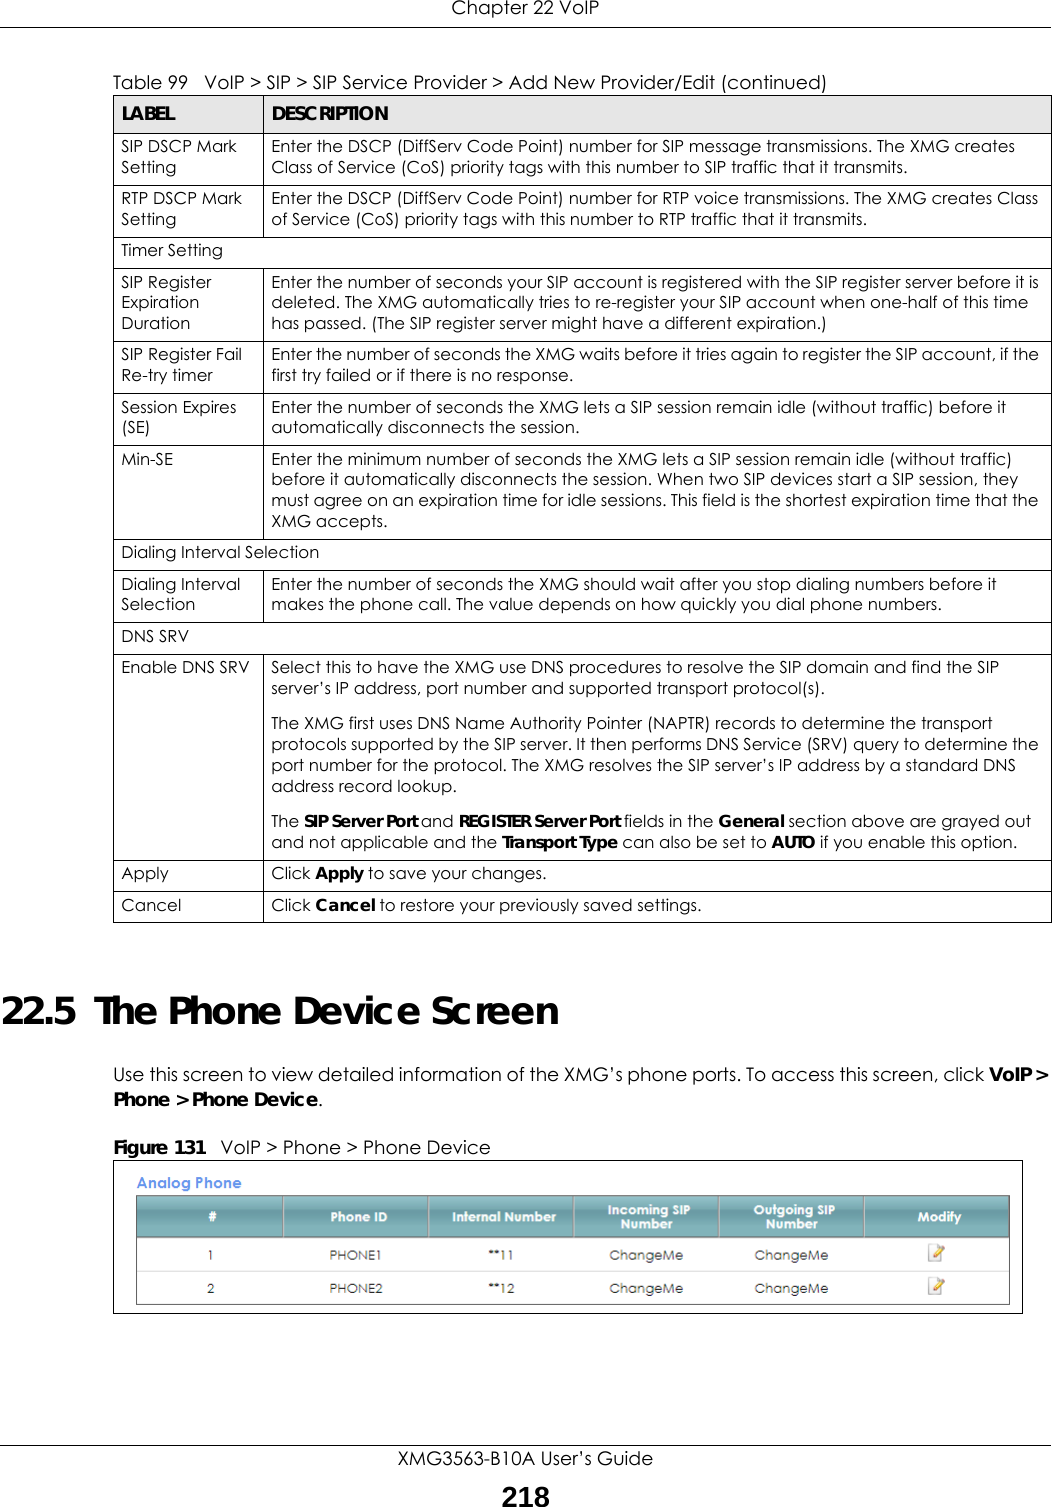 Chapter 22 VoIPXMG3563-B10A User’s Guide21822.5  The Phone Device Screen Use this screen to view detailed information of the XMG’s phone ports. To access this screen, click VoIP &gt; Phone &gt; Phone Device.Figure 131   VoIP &gt; Phone &gt; Phone Device SIP DSCP Mark SettingEnter the DSCP (DiffServ Code Point) number for SIP message transmissions. The XMG creates Class of Service (CoS) priority tags with this number to SIP traffic that it transmits.RTP DSCP Mark SettingEnter the DSCP (DiffServ Code Point) number for RTP voice transmissions. The XMG creates Class of Service (CoS) priority tags with this number to RTP traffic that it transmits.Timer SettingSIP Register Expiration DurationEnter the number of seconds your SIP account is registered with the SIP register server before it is deleted. The XMG automatically tries to re-register your SIP account when one-half of this time has passed. (The SIP register server might have a different expiration.)SIP Register Fail Re-try timerEnter the number of seconds the XMG waits before it tries again to register the SIP account, if the first try failed or if there is no response.Session Expires (SE)Enter the number of seconds the XMG lets a SIP session remain idle (without traffic) before it automatically disconnects the session.Min-SE Enter the minimum number of seconds the XMG lets a SIP session remain idle (without traffic) before it automatically disconnects the session. When two SIP devices start a SIP session, they must agree on an expiration time for idle sessions. This field is the shortest expiration time that the XMG accepts.Dialing Interval SelectionDialing Interval SelectionEnter the number of seconds the XMG should wait after you stop dialing numbers before it makes the phone call. The value depends on how quickly you dial phone numbers.DNS SRVEnable DNS SRV Select this to have the XMG use DNS procedures to resolve the SIP domain and find the SIP server’s IP address, port number and supported transport protocol(s).The XMG first uses DNS Name Authority Pointer (NAPTR) records to determine the transport protocols supported by the SIP server. It then performs DNS Service (SRV) query to determine the port number for the protocol. The XMG resolves the SIP server’s IP address by a standard DNS address record lookup.The SIP Server Port and REGISTER Server Port fields in the General section above are grayed out and not applicable and the Transport Type can also be set to AUTO if you enable this option.Apply Click Apply to save your changes.Cancel Click Cancel to restore your previously saved settings.Table 99   VoIP &gt; SIP &gt; SIP Service Provider &gt; Add New Provider/Edit (continued)LABEL DESCRIPTION